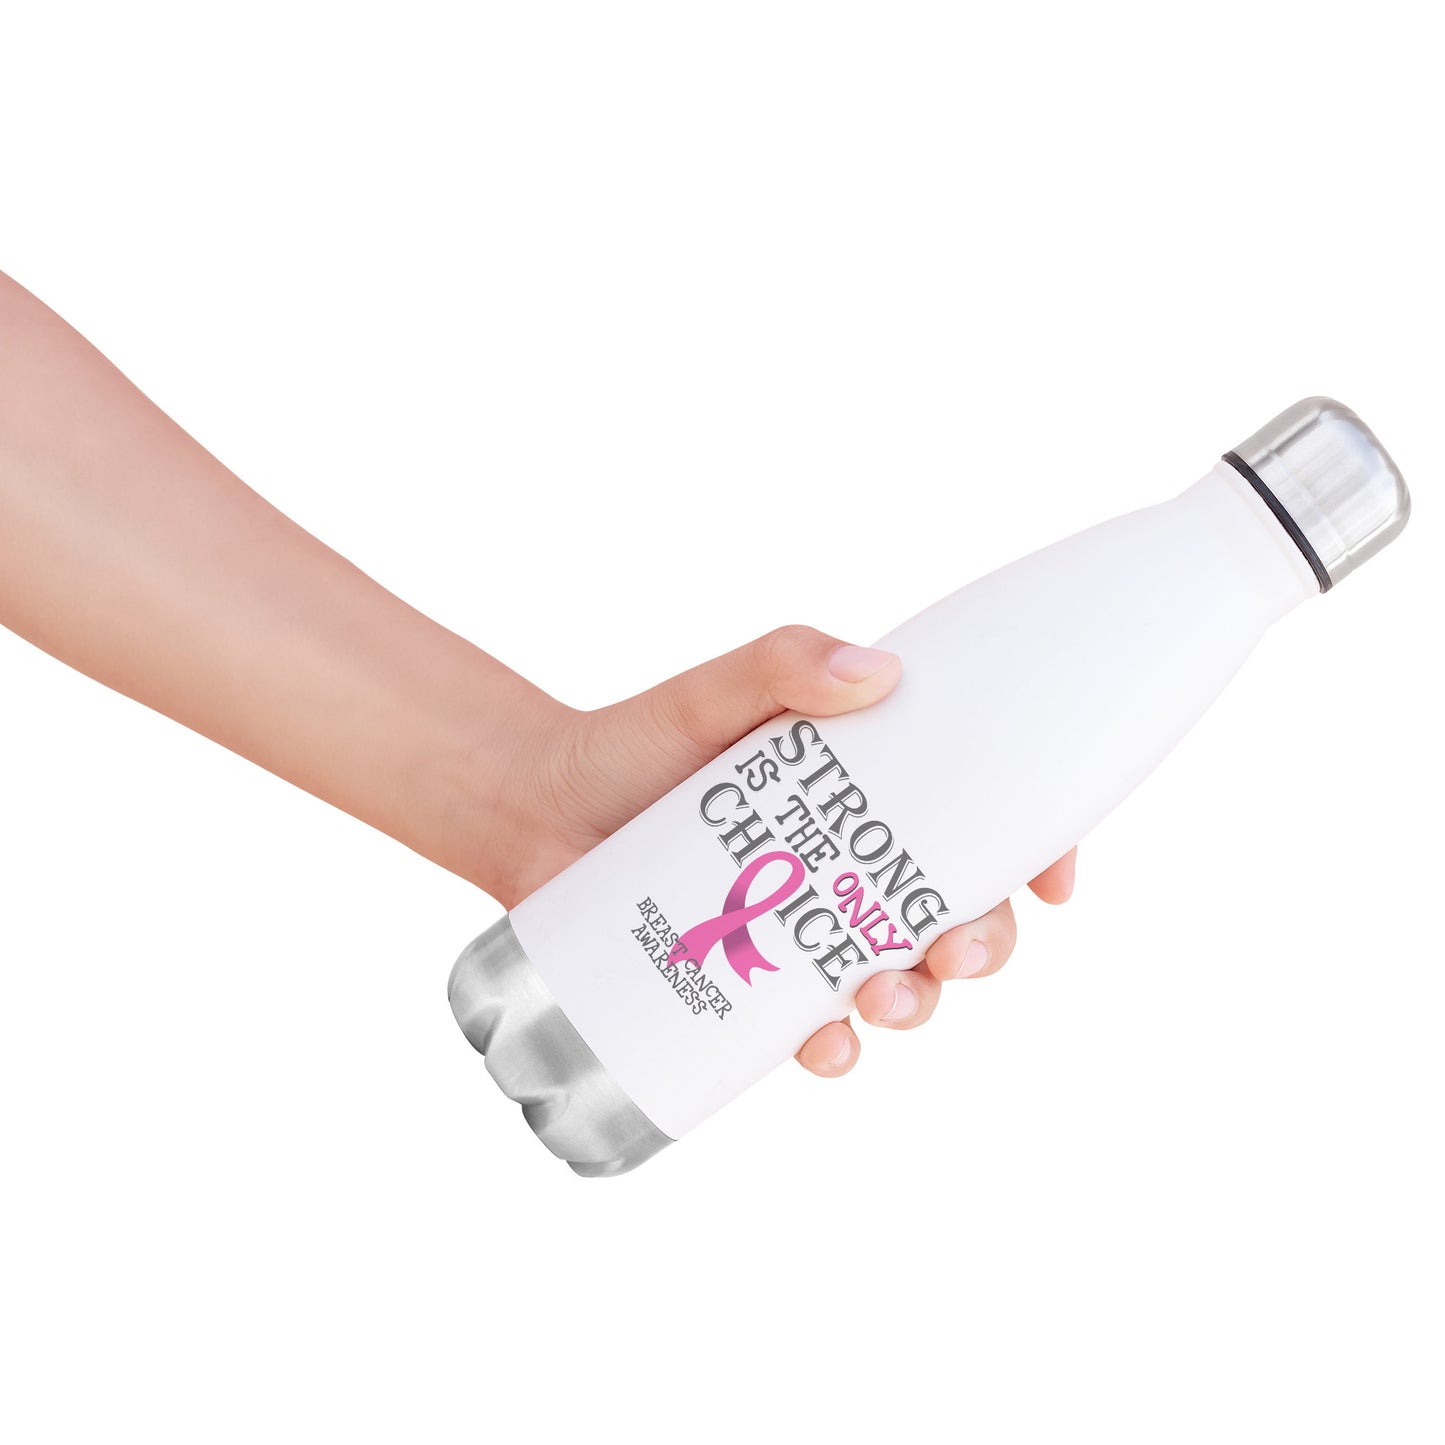 Strong is the Only Choice -Breast Cancer Awareness 20oz Insulated Water Bottle